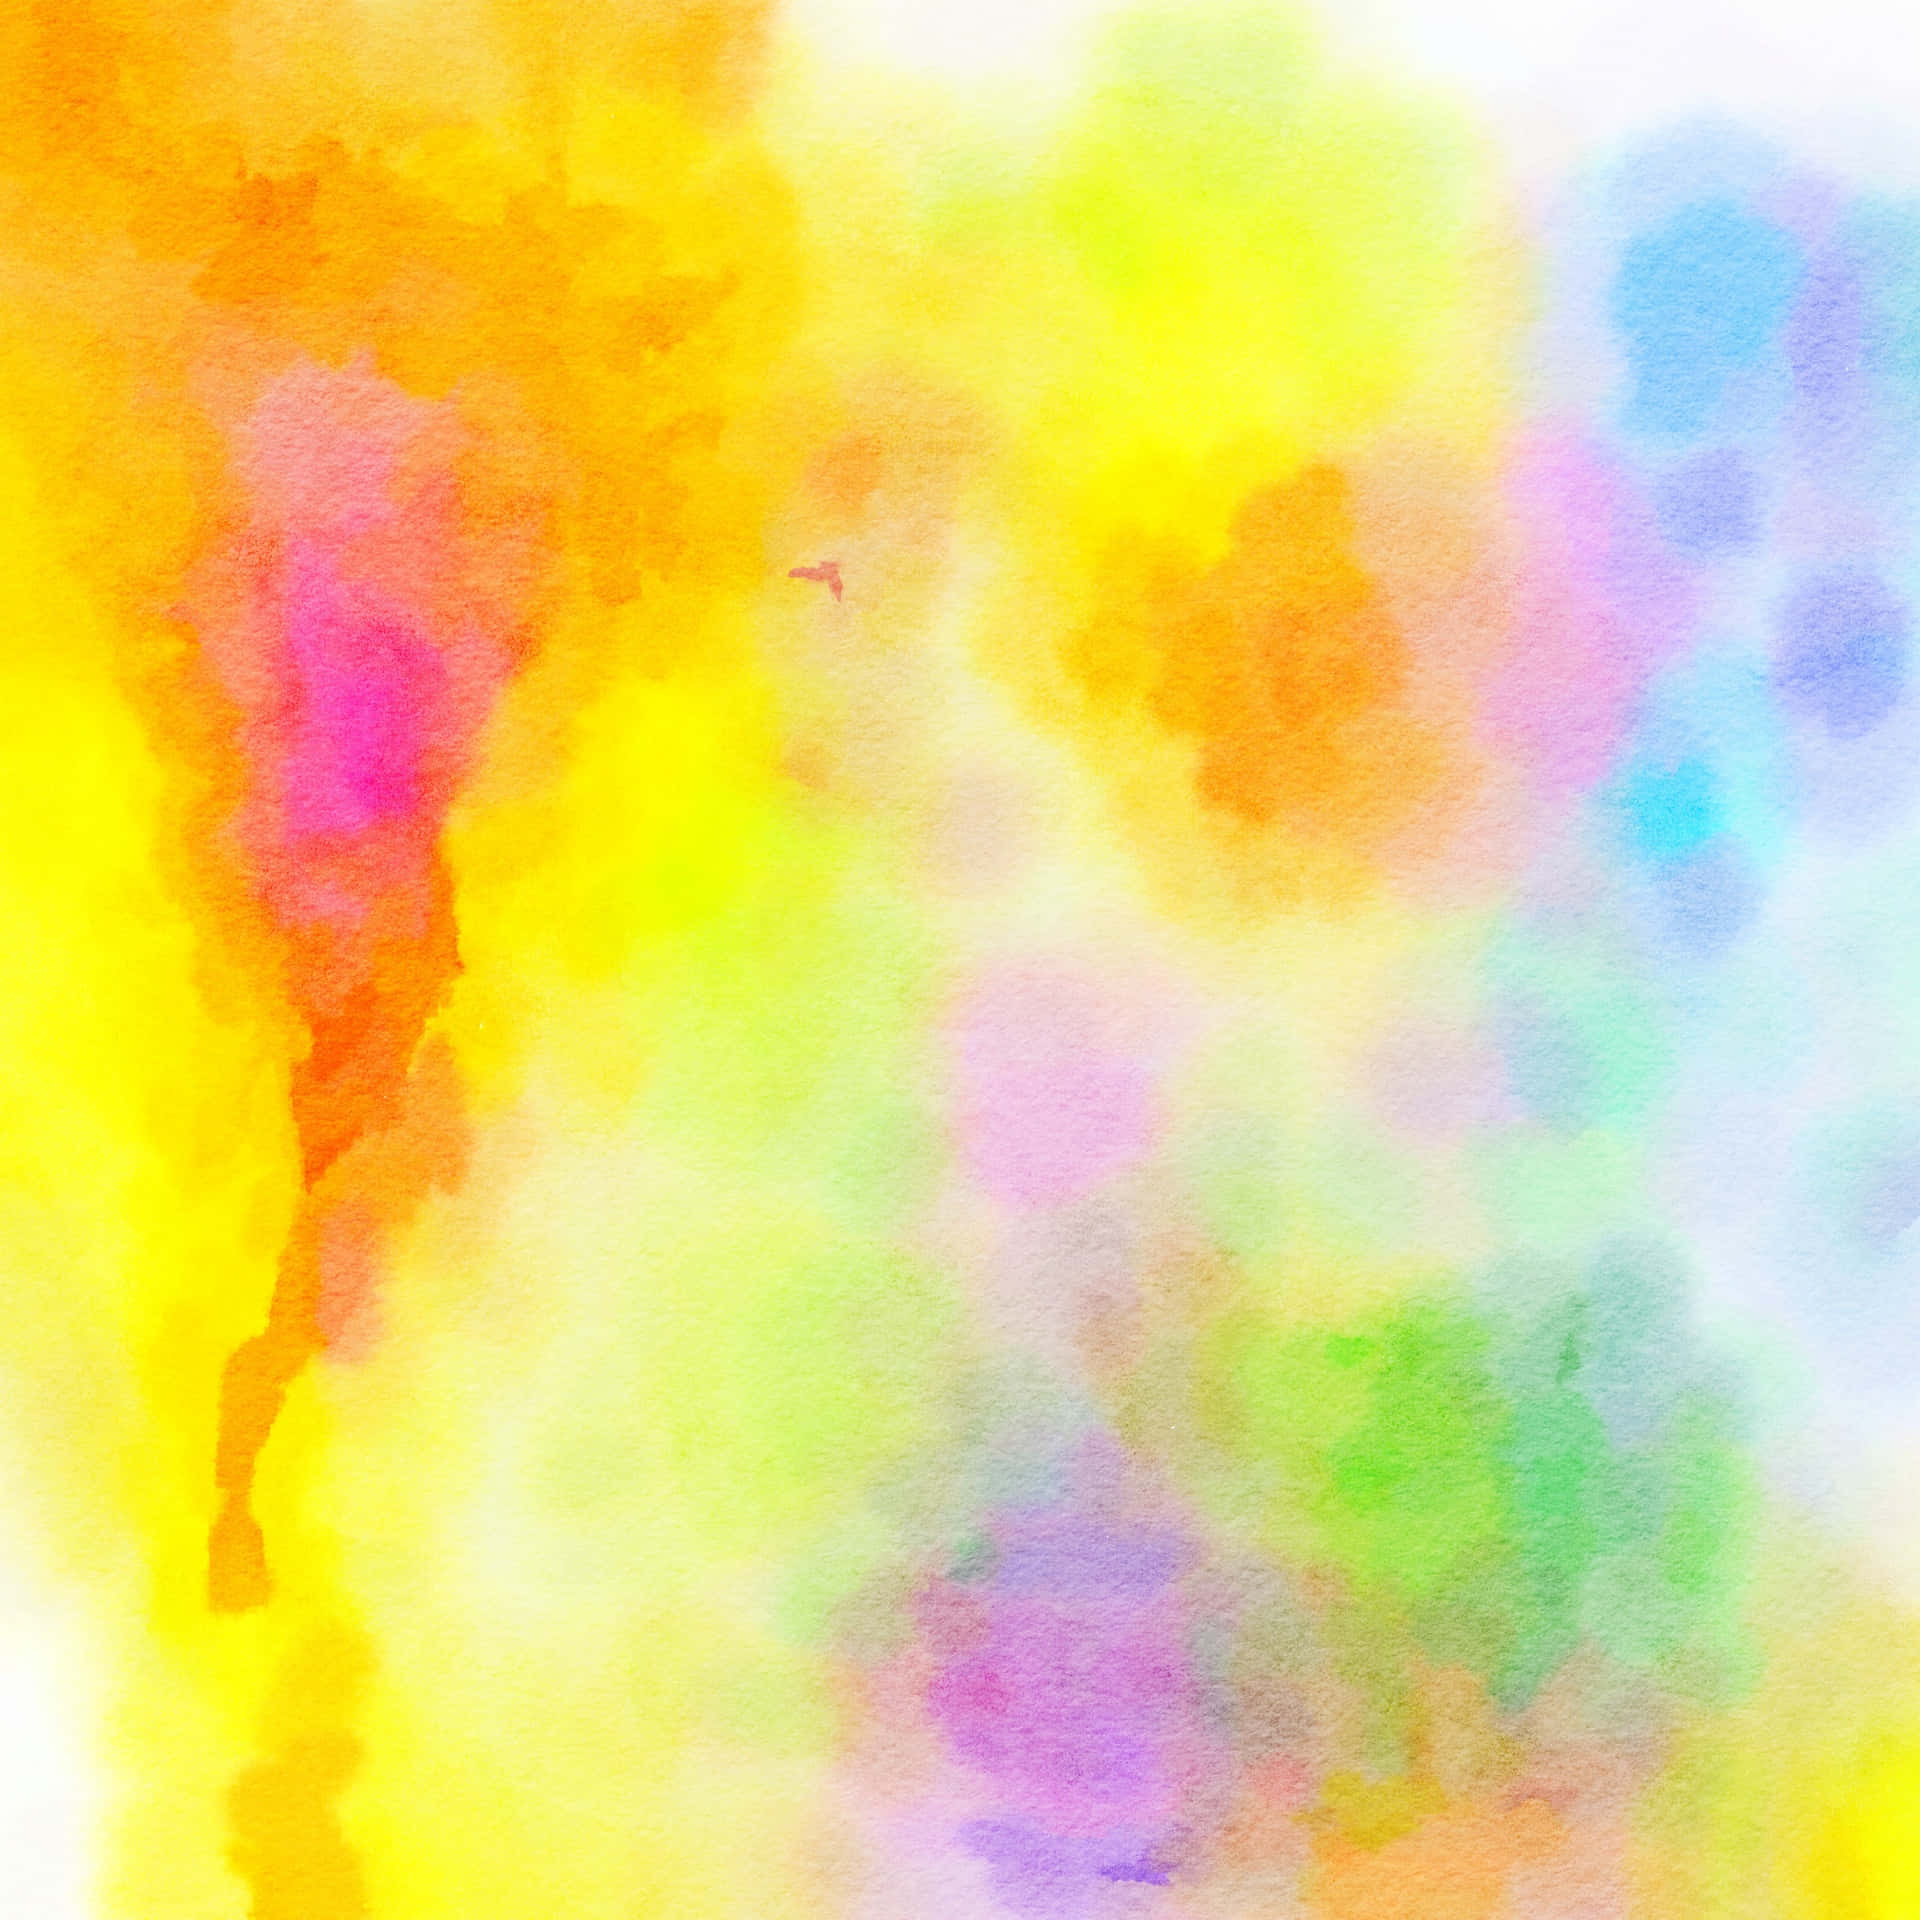 A Watercolor Painting With Bright Colors